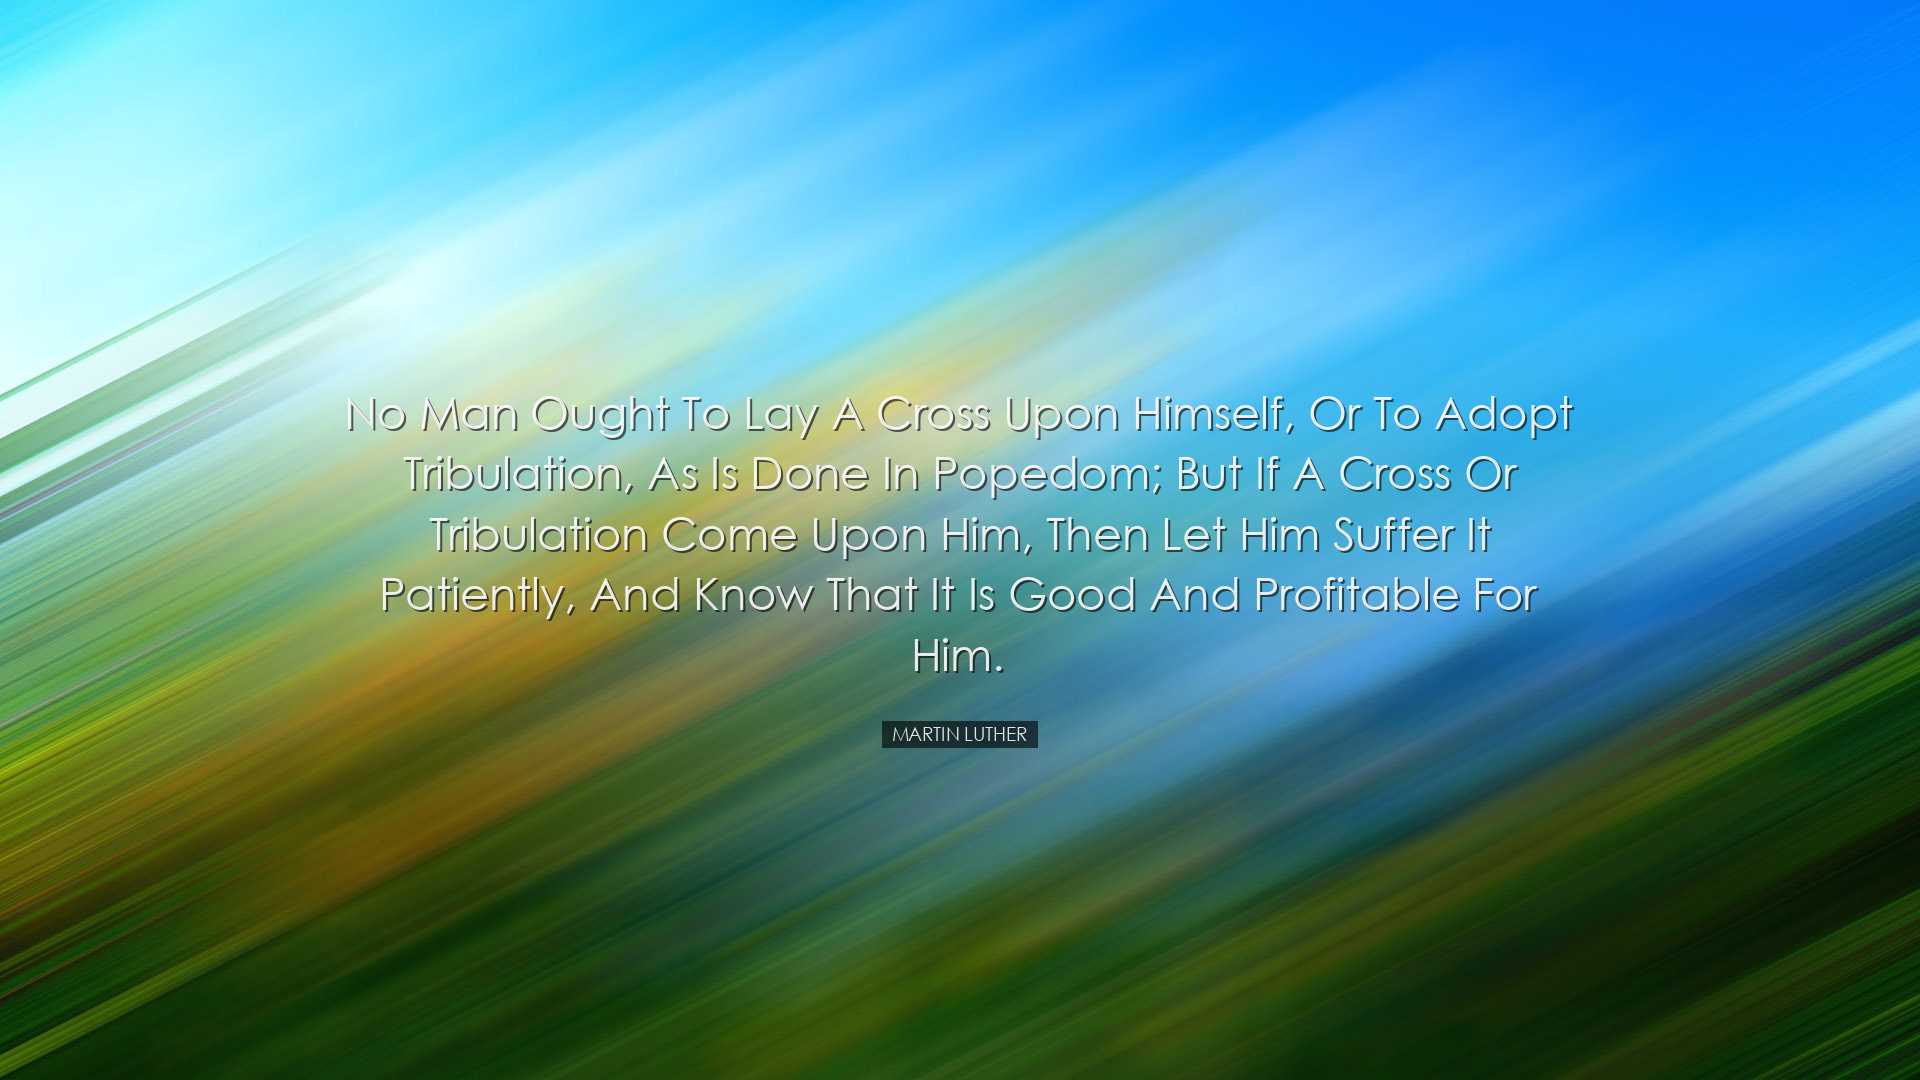 No man ought to lay a cross upon himself, or to adopt tribulation,